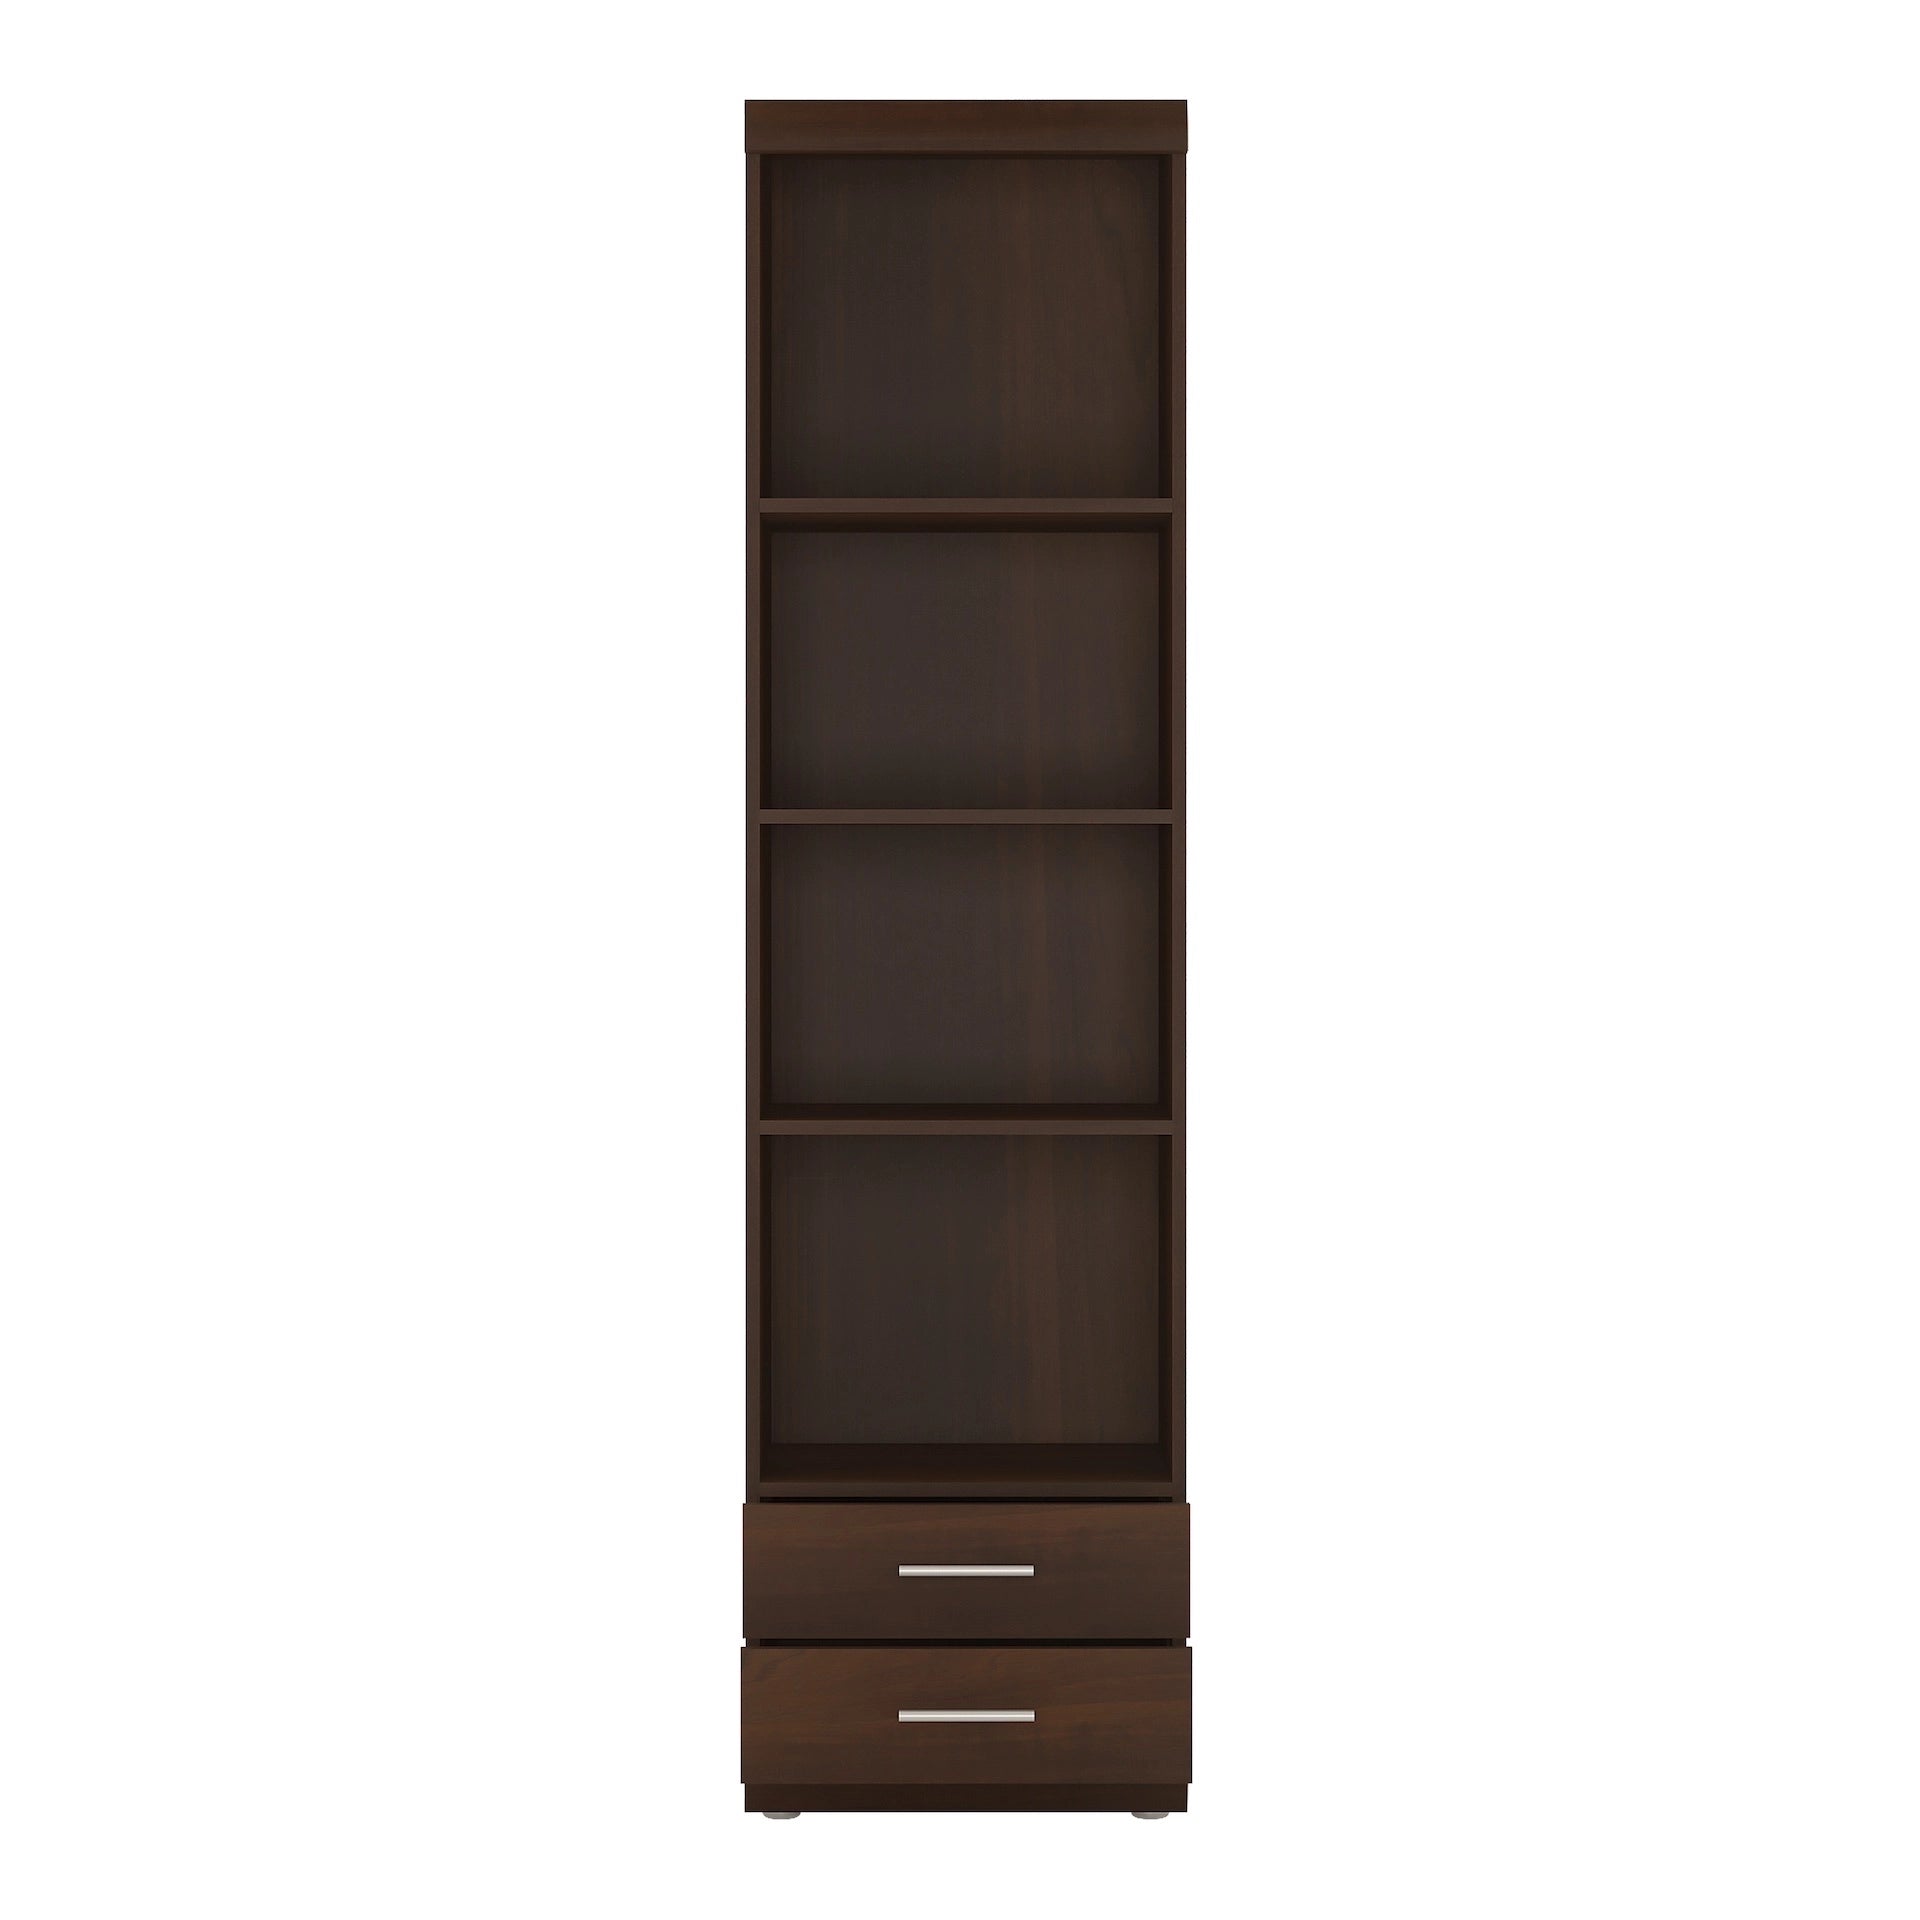 Furniture To Go Imperial Tall 2 Drawer Narrow Cabinet with Open Shelving in Dark Mahogany Melamine